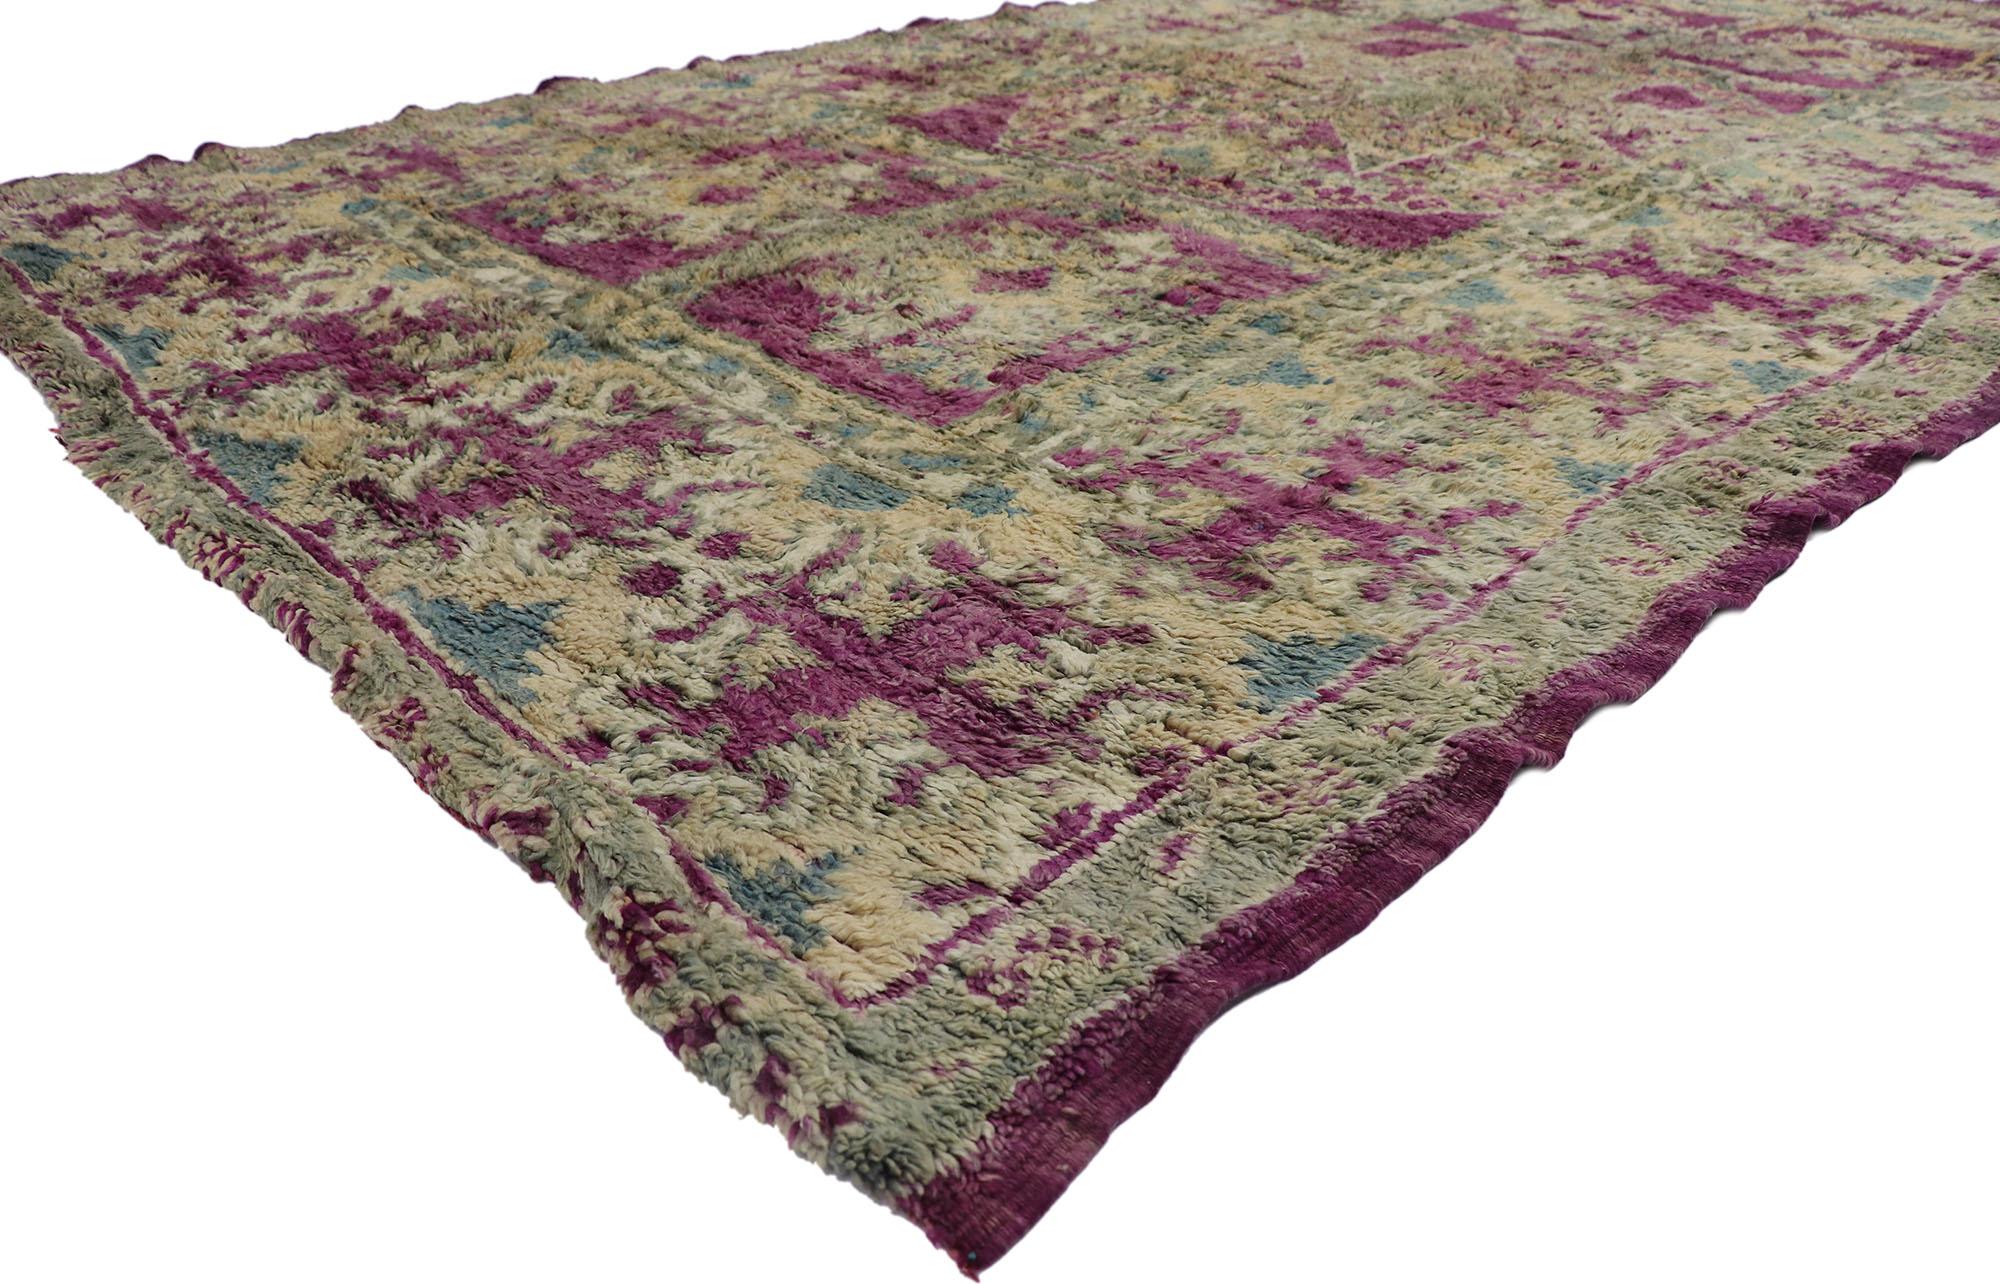 21480 Vintage Berber Purple Moroccan rug with Bohemian Style 07'01 x 12'06. Showcasing a bold expressive design, incredible detail and texture, this hand knotted wool vintage Berber Moroccan rug is a captivating vision of woven beauty. The